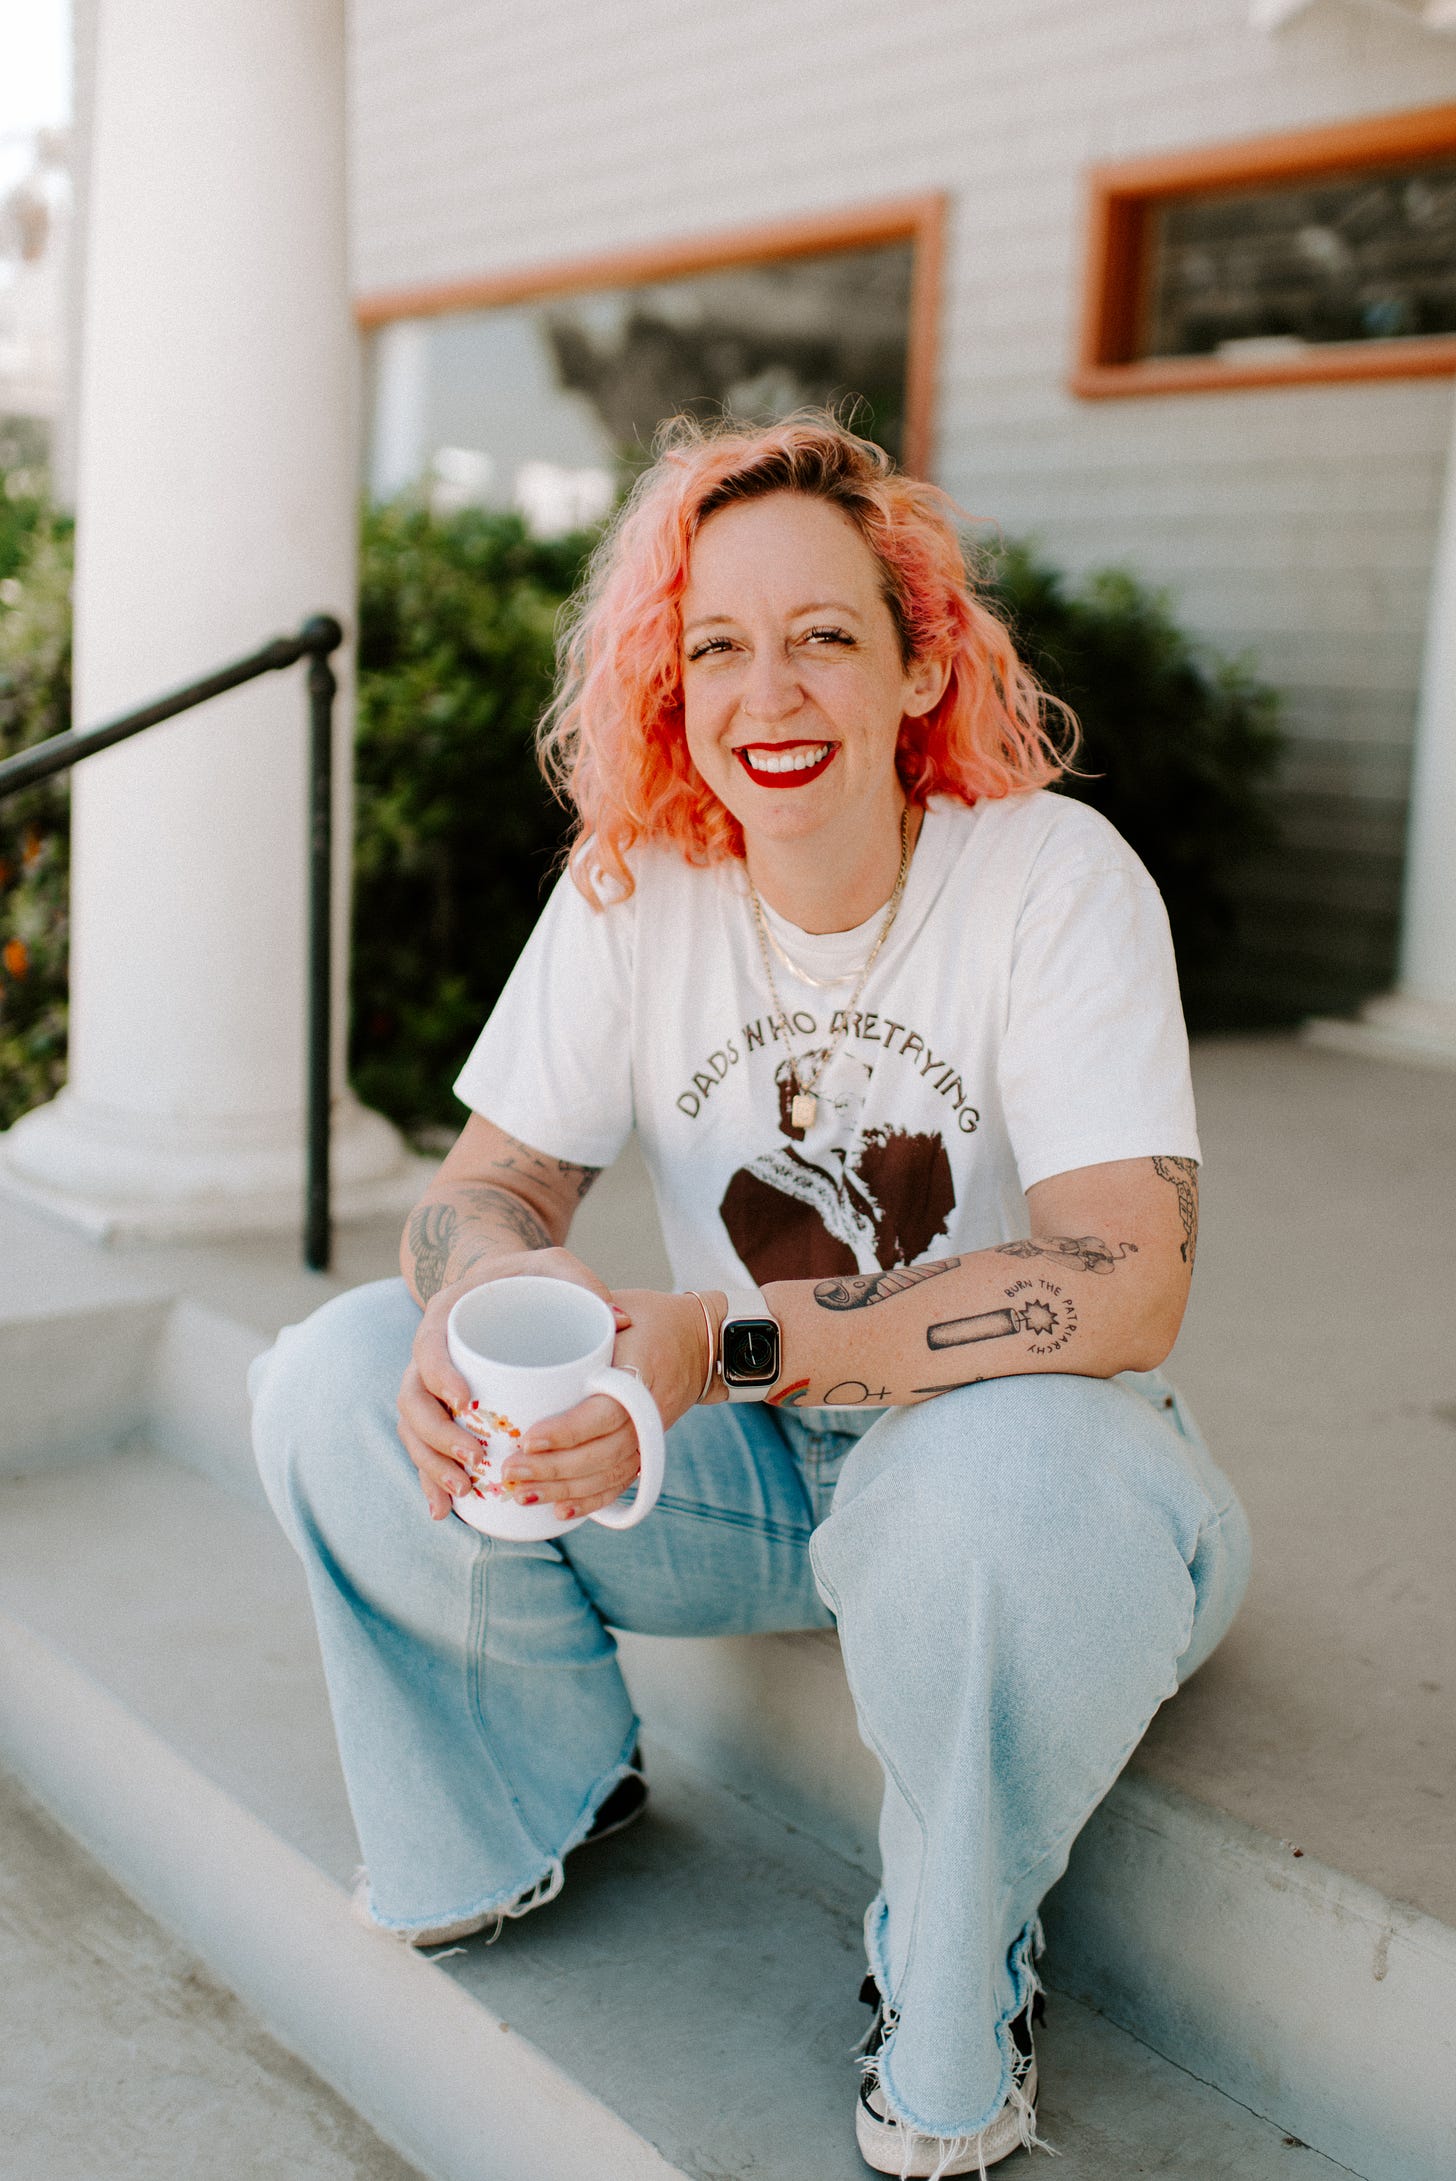 a white woman with pink curly hair smiles at the camera. She has red lipstick on and is sitting on a porch in a white tshirt and jeans holding a mug. 